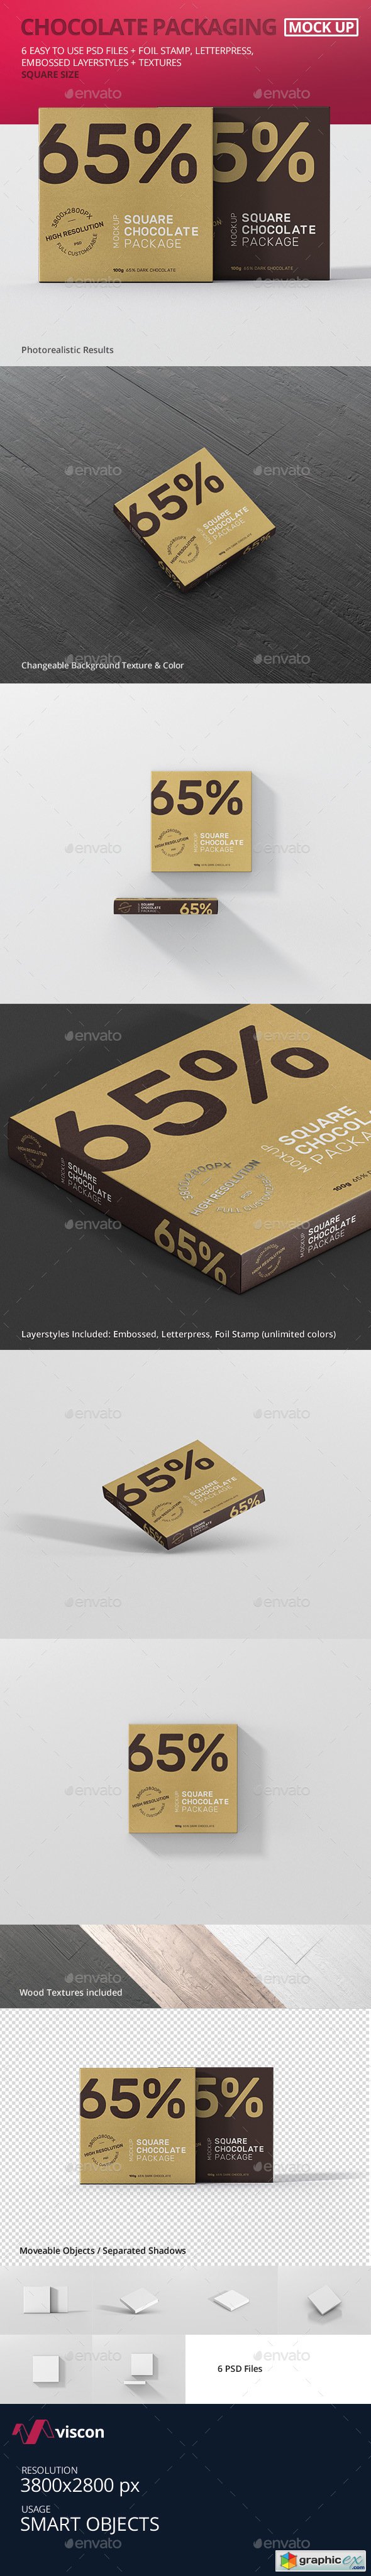 Chocolate Packaging Mockup Square Size